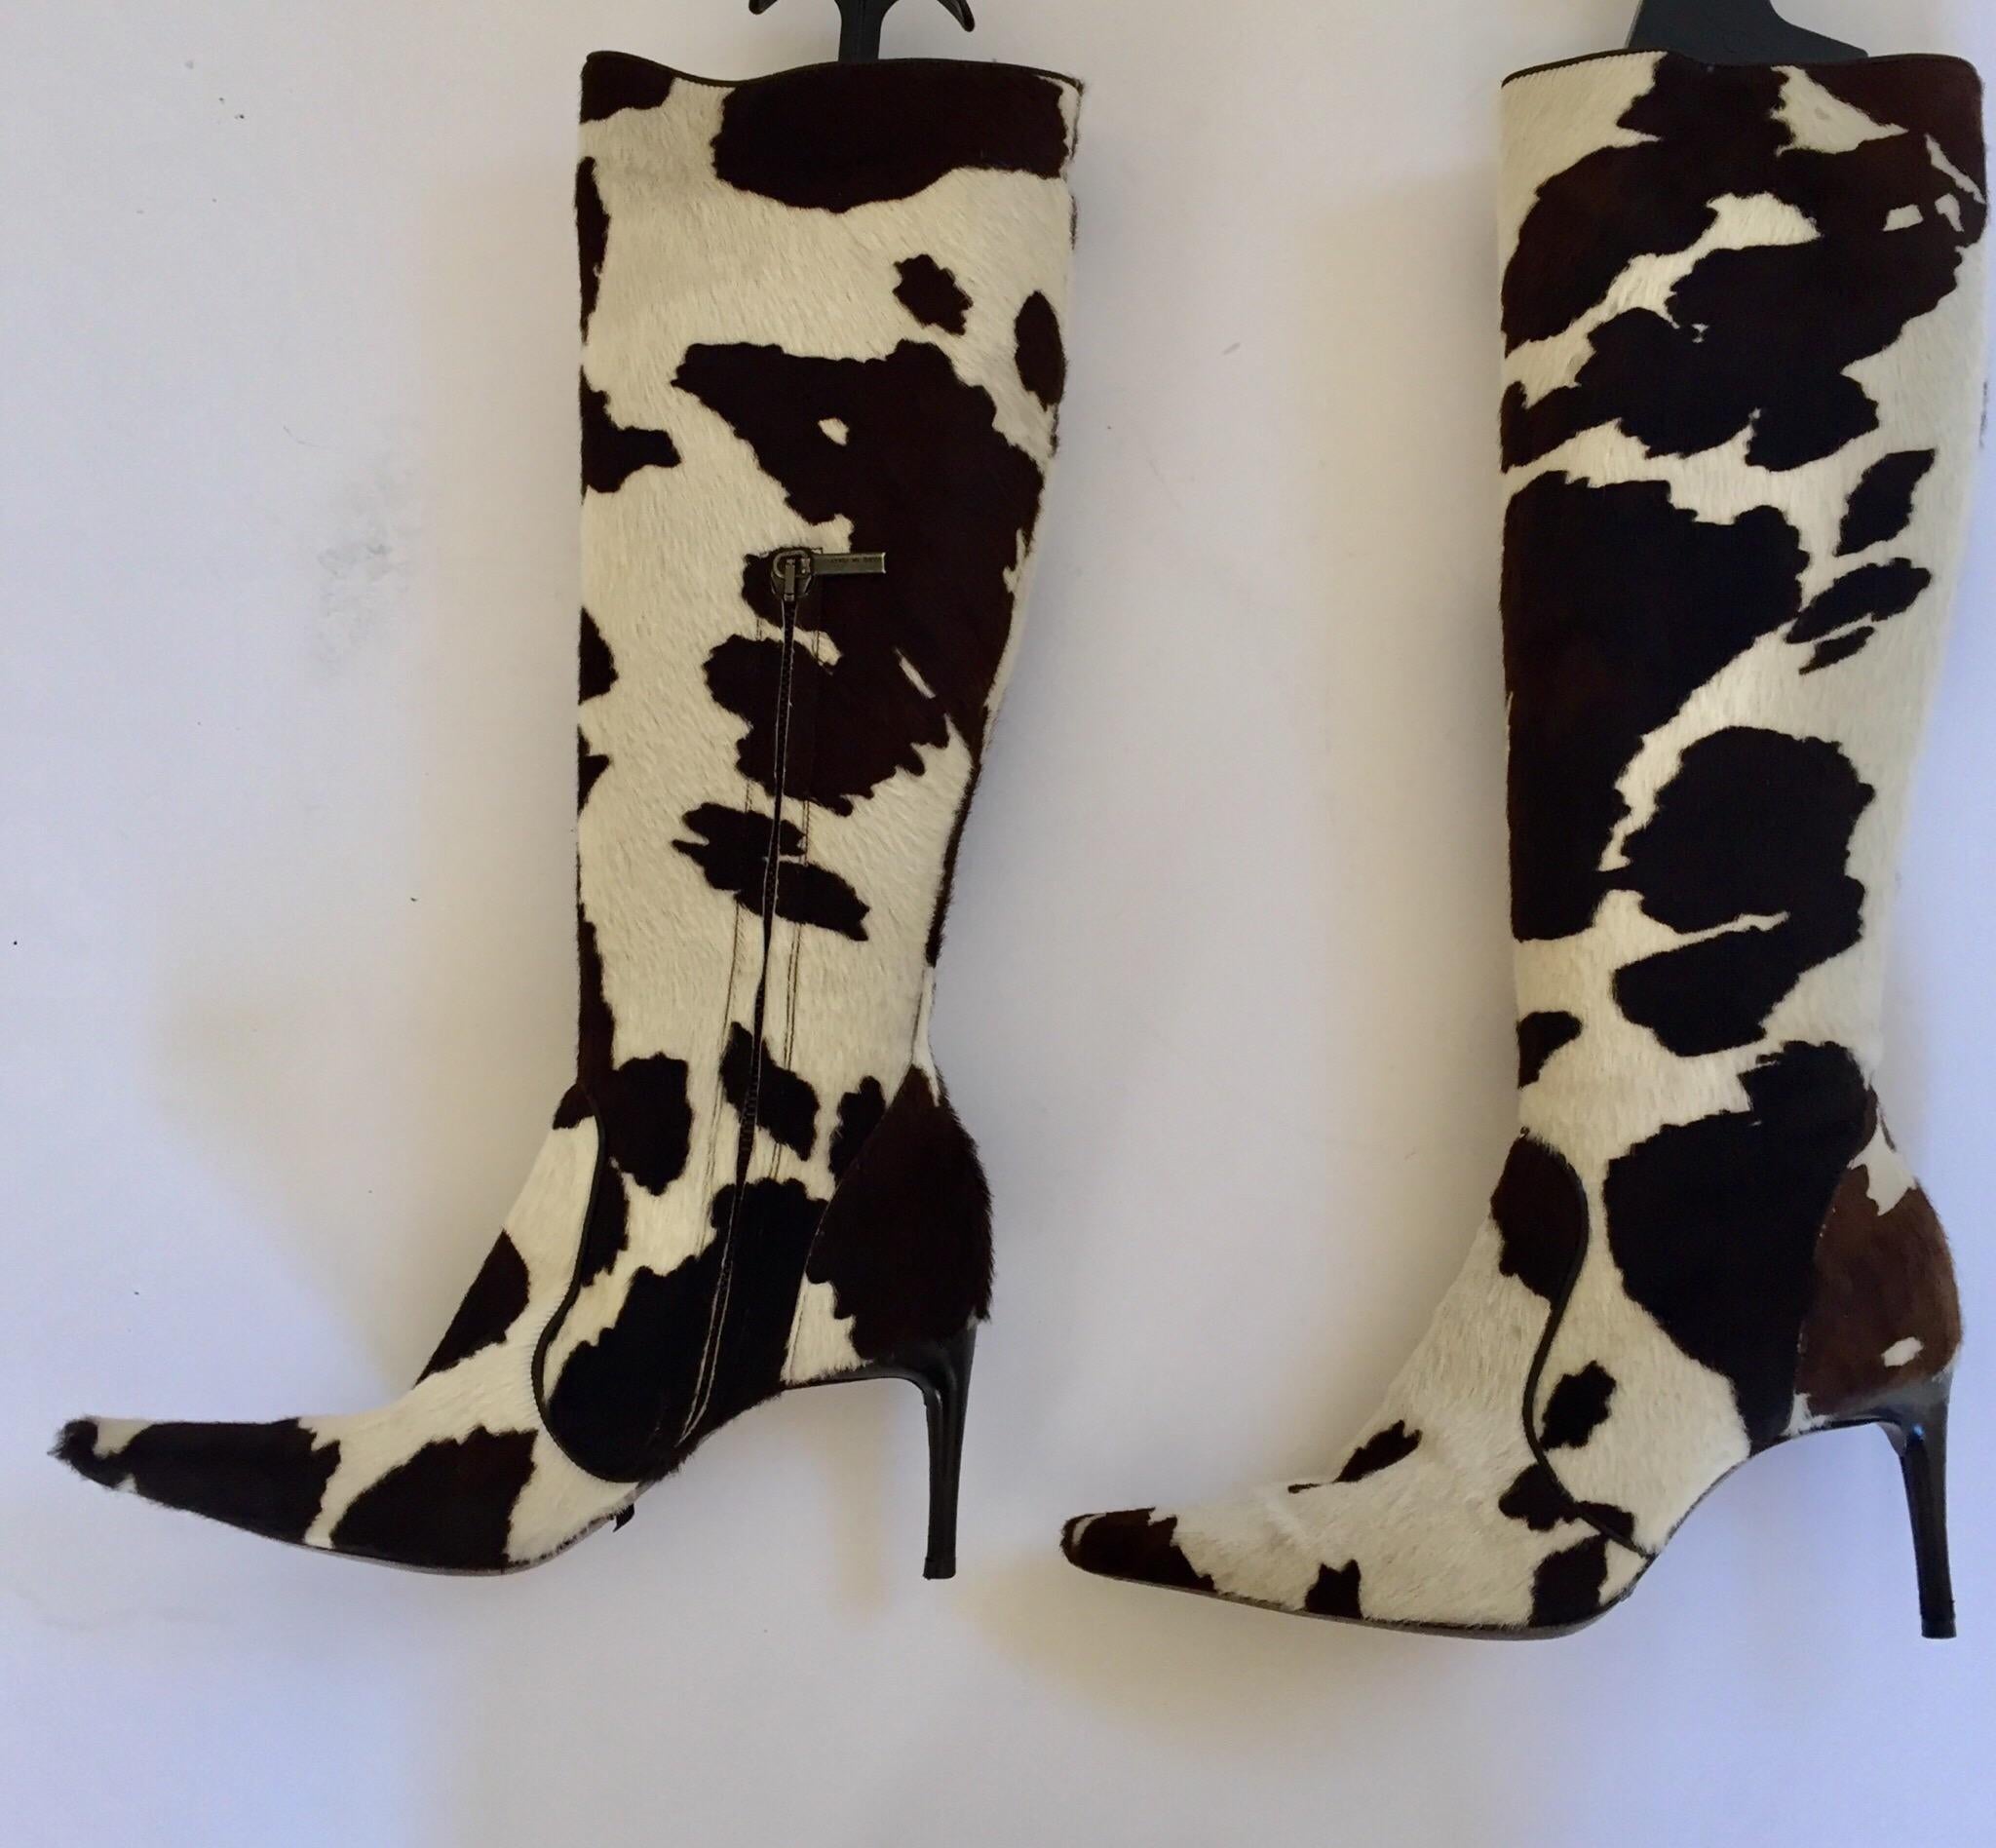 Vintage Dolce Gabbana fitted boots animal print size 35 EU 5 US
Black and white knee fitted boots in cow printed dyed calf hair (Italy).
They’re shaped with a pointed toe and sit on a high stiletto heel.
Leather lining and sole.
Zipper.
Made in